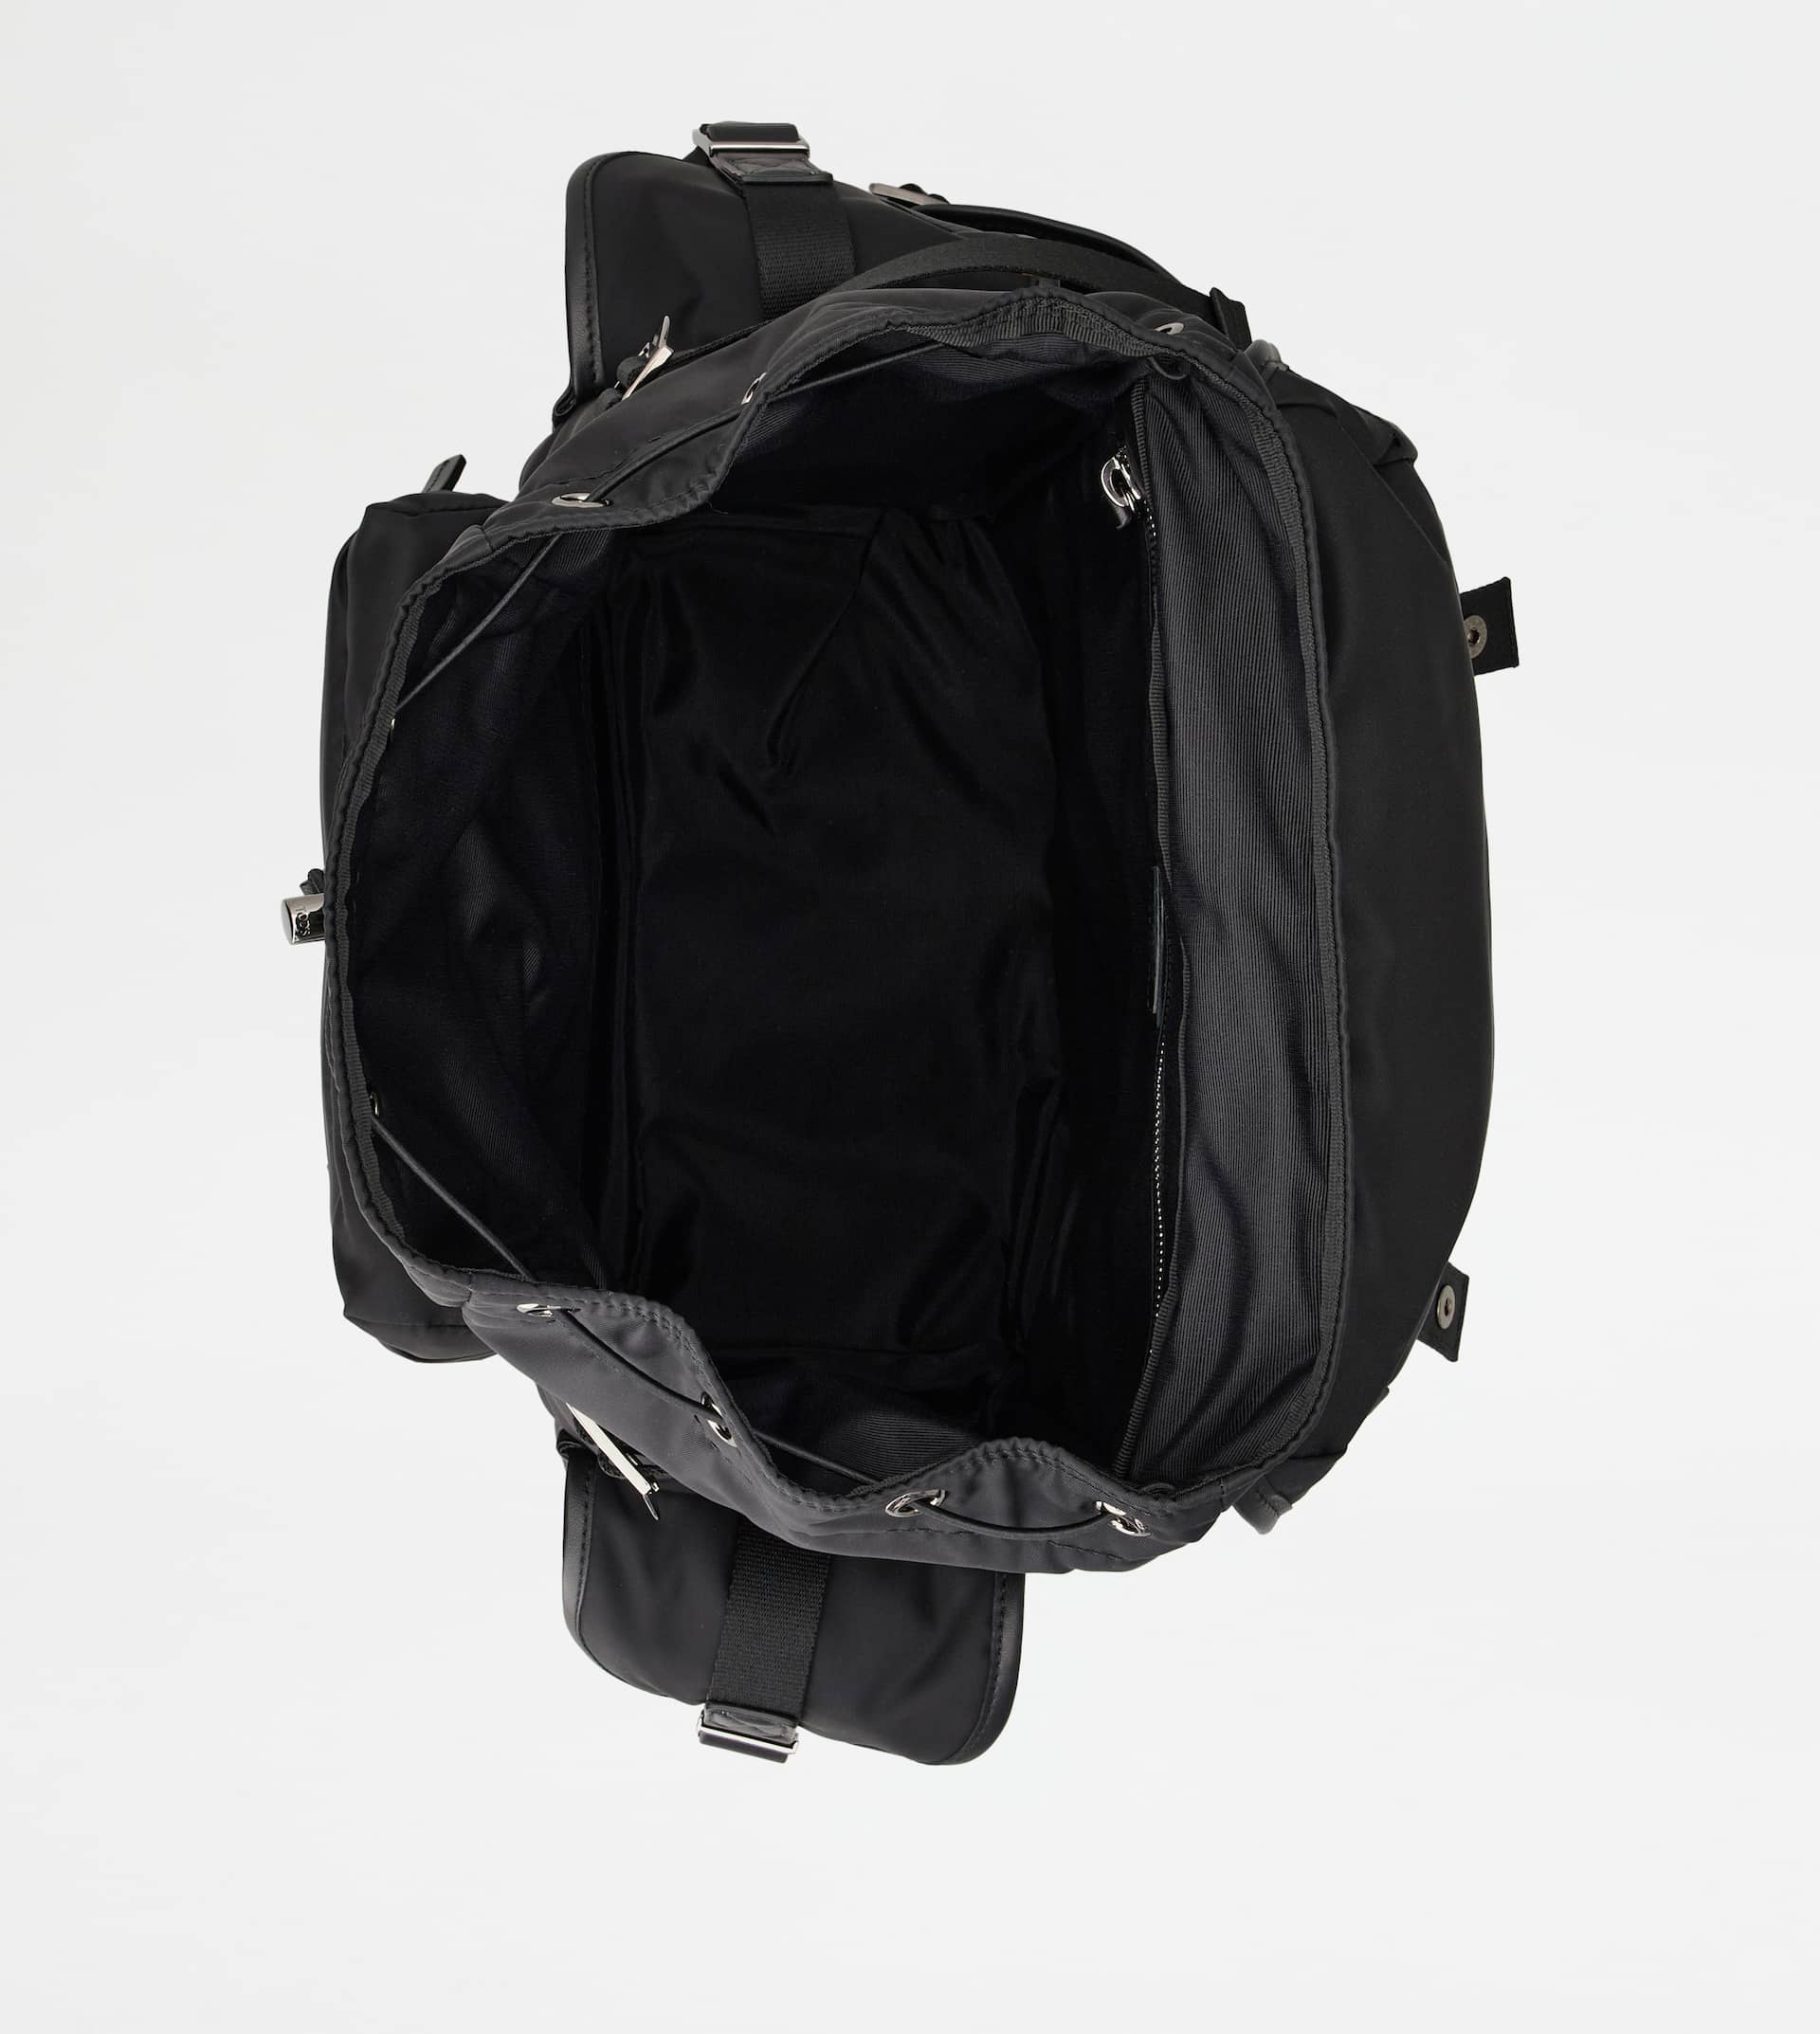 BACKPACK IN FABRIC AND LEATHER MEDIUM - BLACK - 6